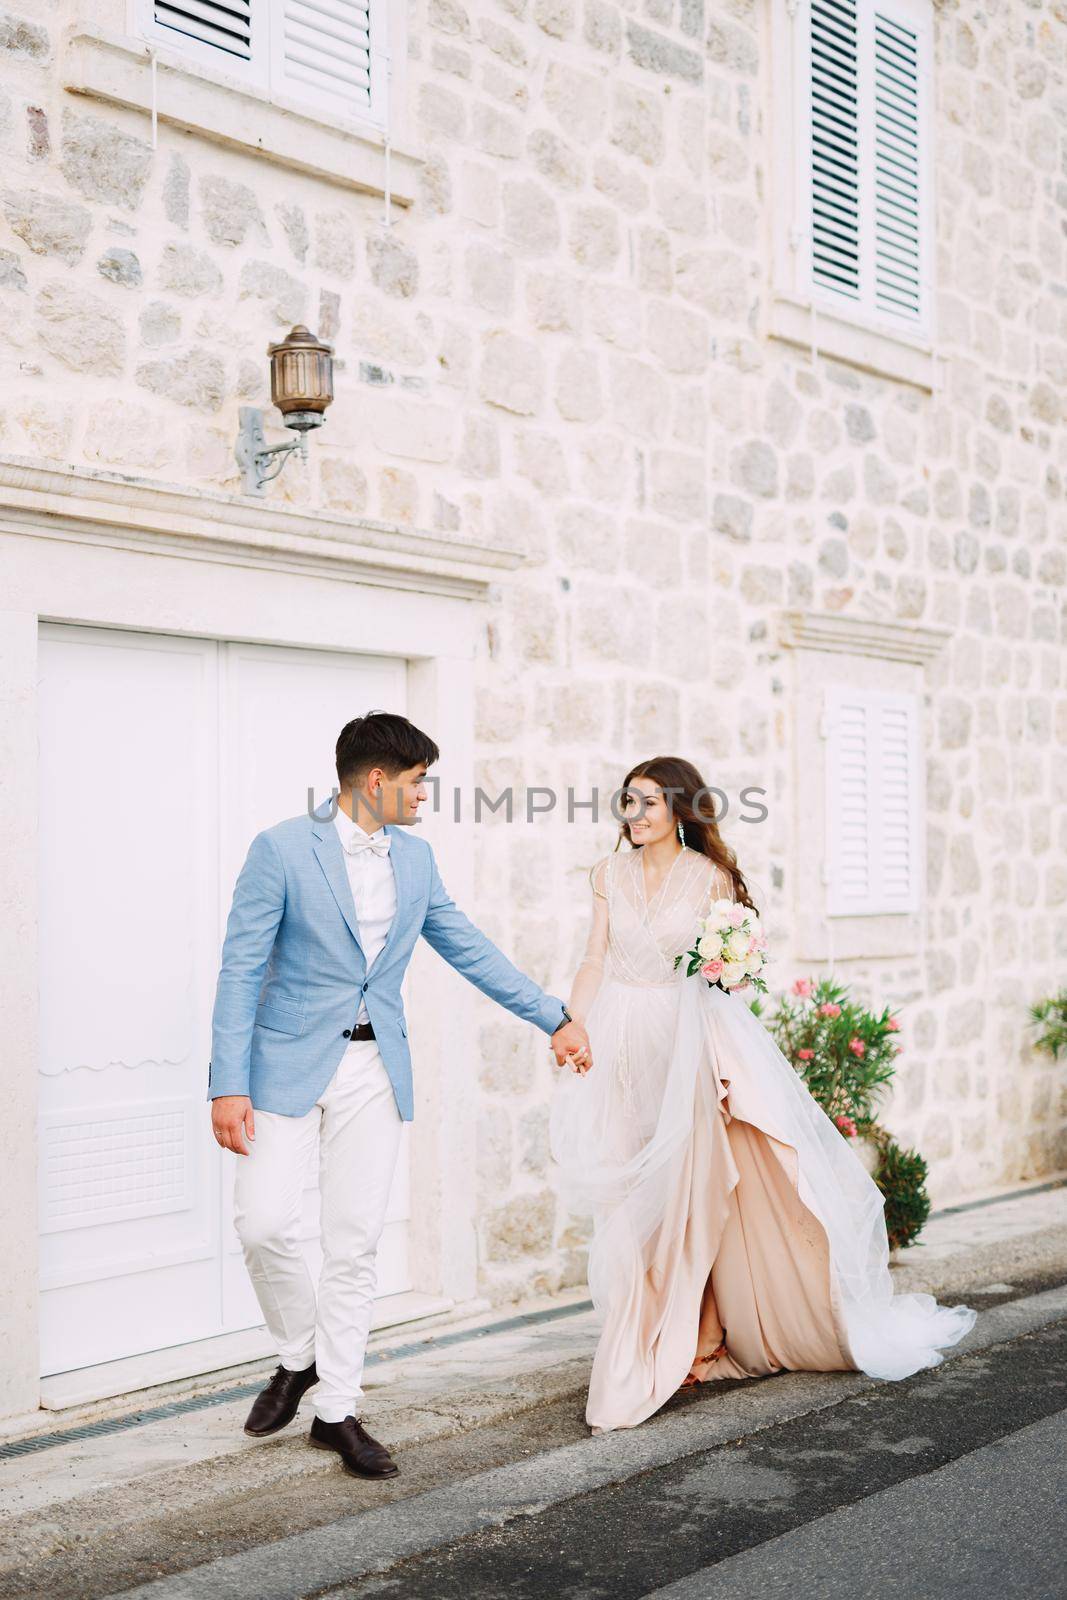 The bride and groom stand holding hands in front of a beautiful white house in the old town of Perast . High quality photo